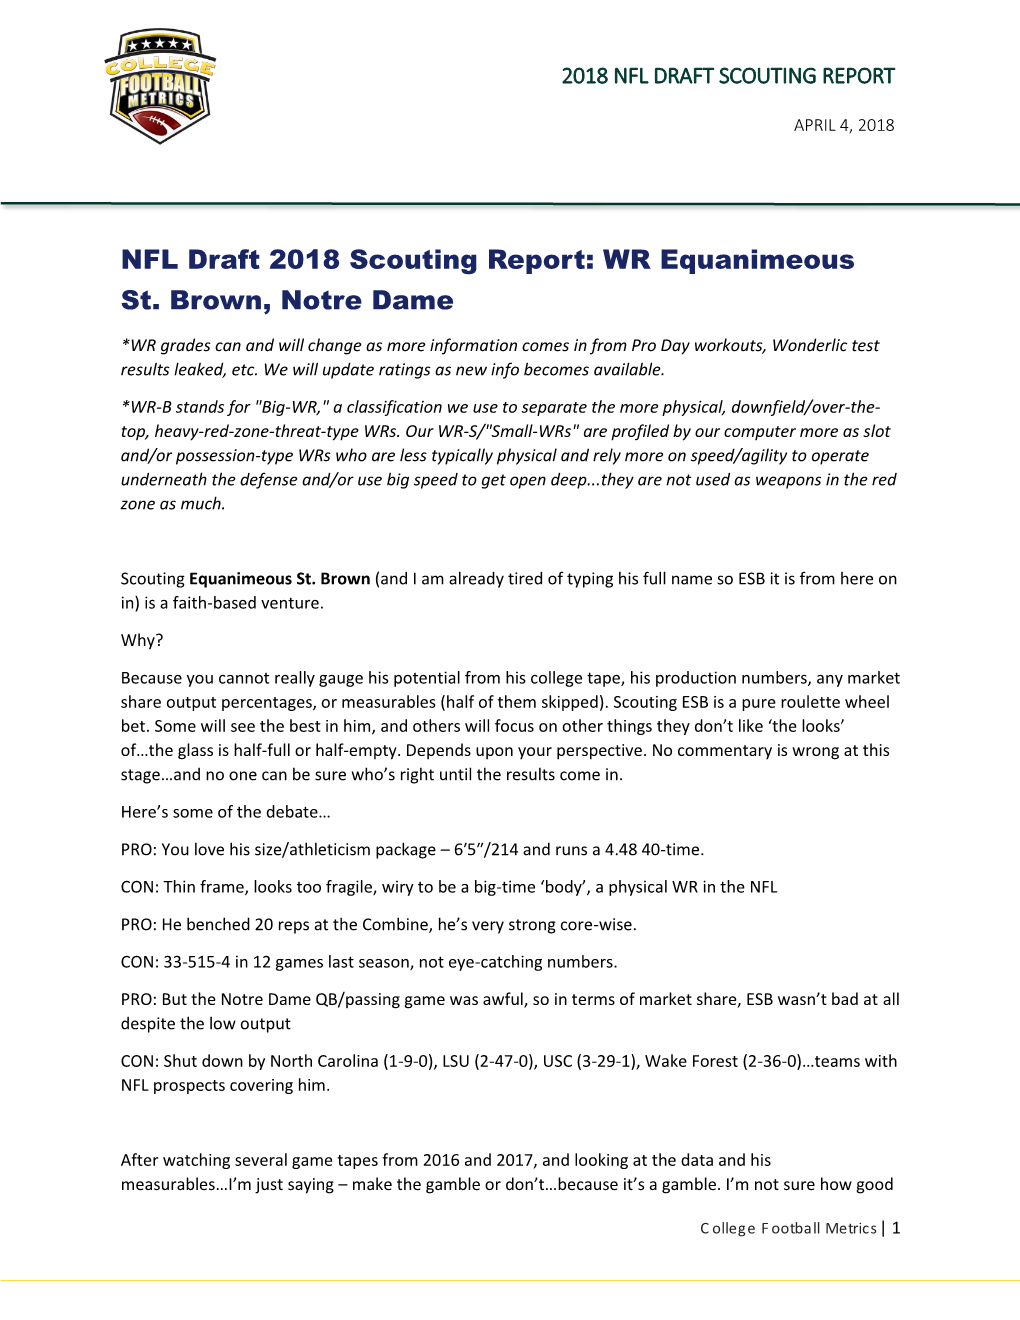 NFL Draft 2018 Scouting Report: WR Equanimeous St. Brown, Notre Dame